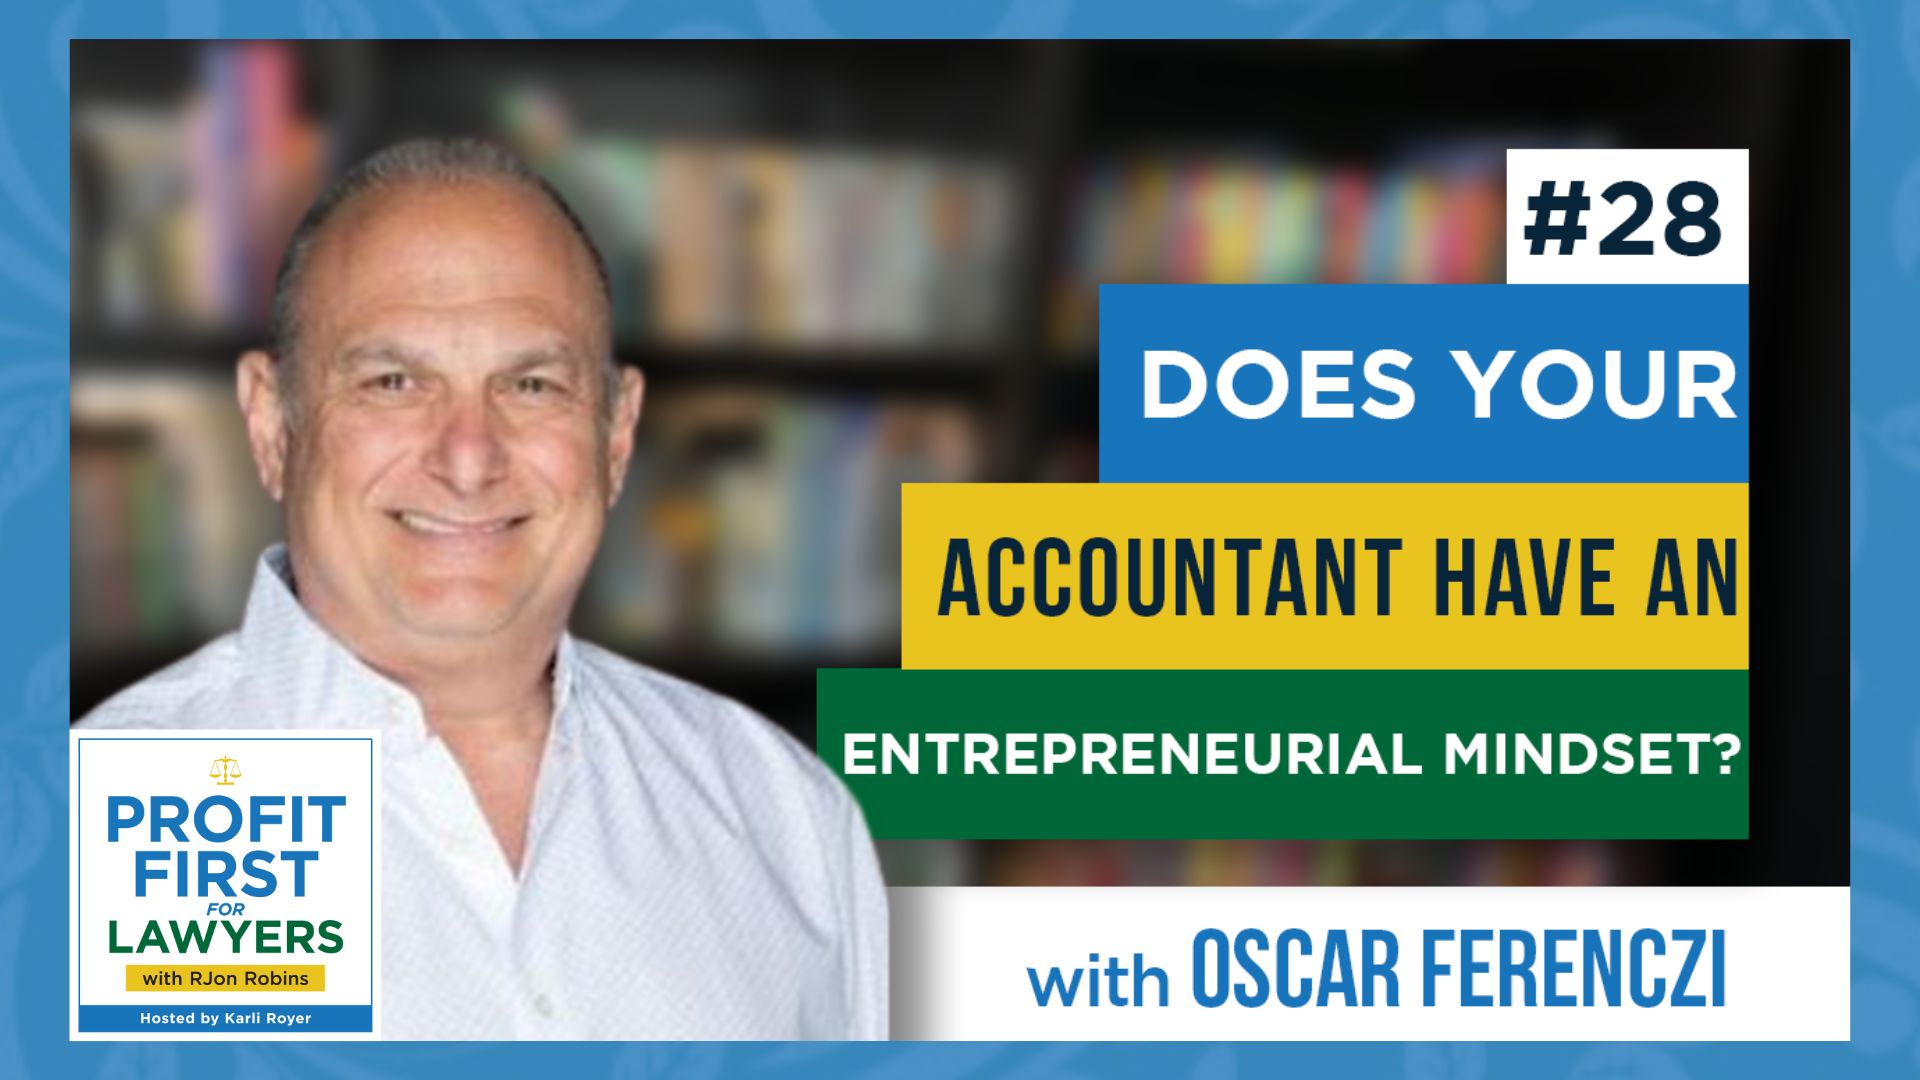 Featured Image: Oscar Ferenczi from How To Manage a Small Law Firm is the featured guest on episode 28 for the show titled, "Does Your Accountant Have An Entrepreneurial Mindset?" on the Profit First For Lawyers podcast.